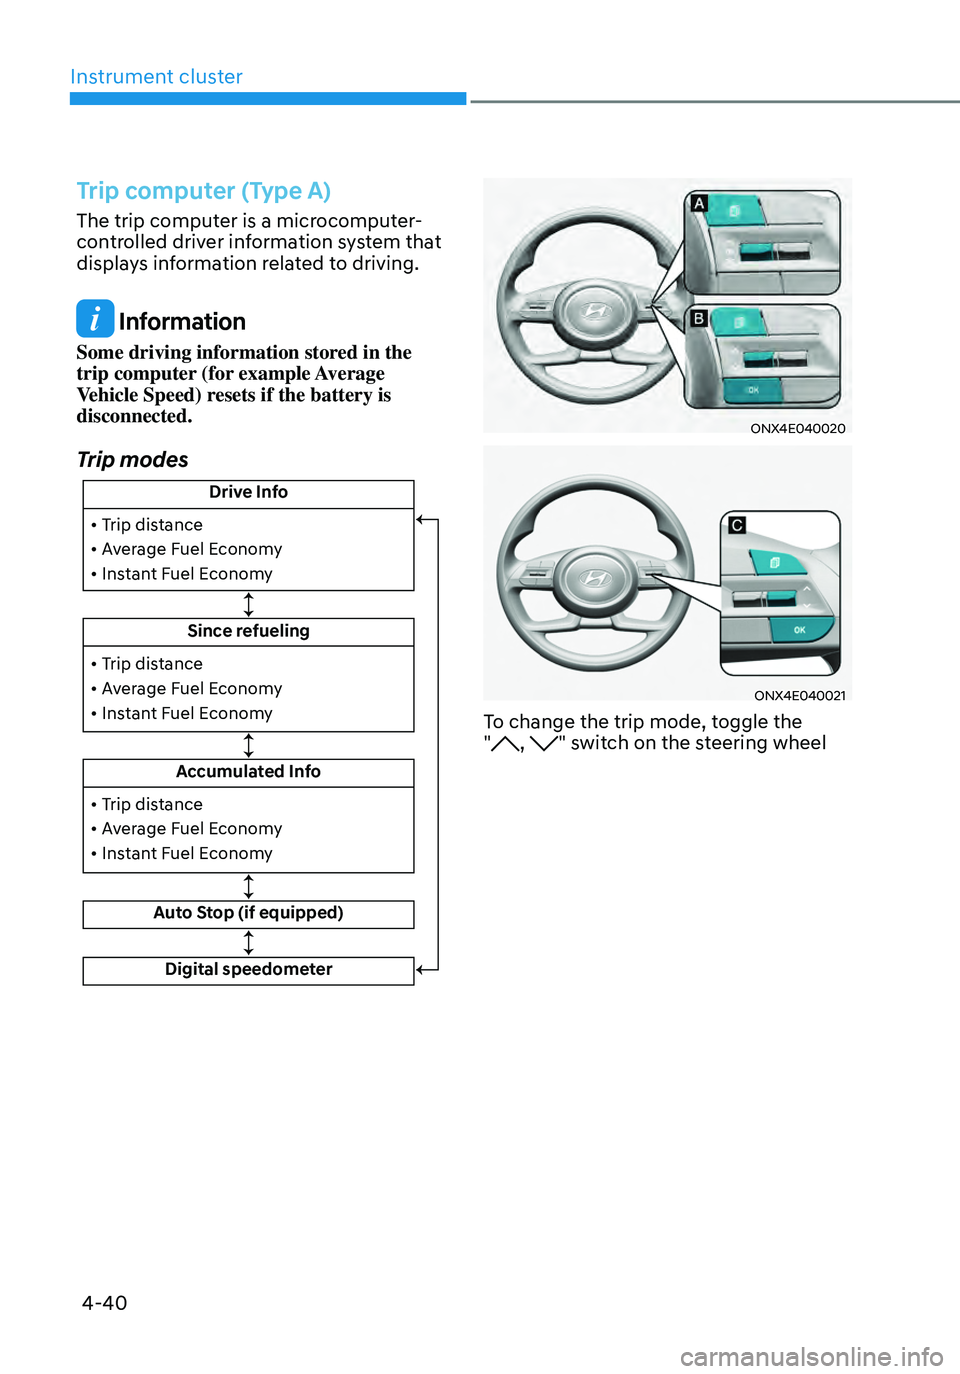 HYUNDAI TUCSON 2022 Service Manual Instrument cluster
4-40
Trip computer (Type A)
The trip computer is a microcomputer-
controlled driver information system that 
displays information related to driving.
 Information
Some driving infor